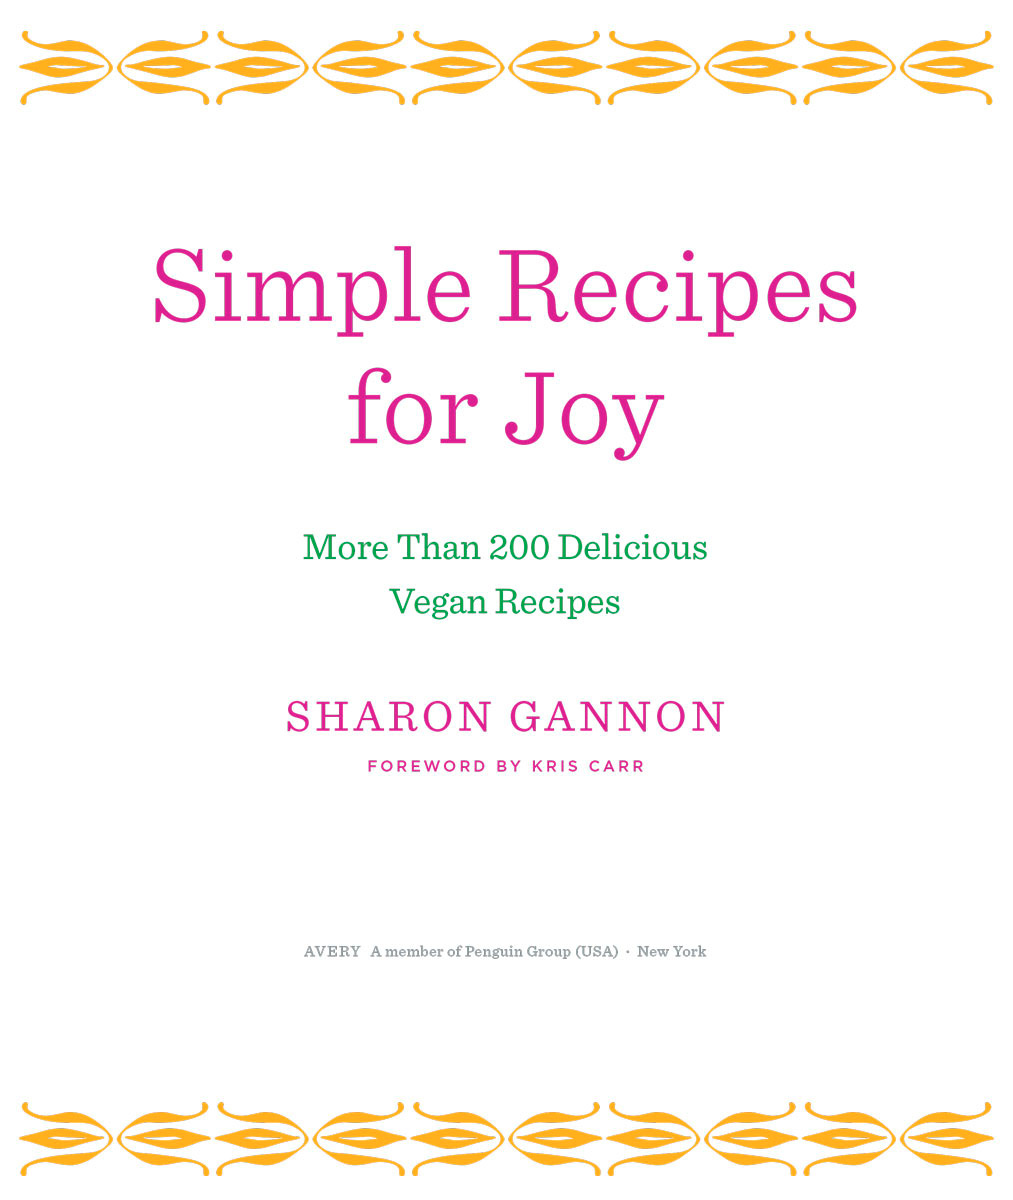 Simple recipes for joy more than 200 delicious vegan recipes - image 3